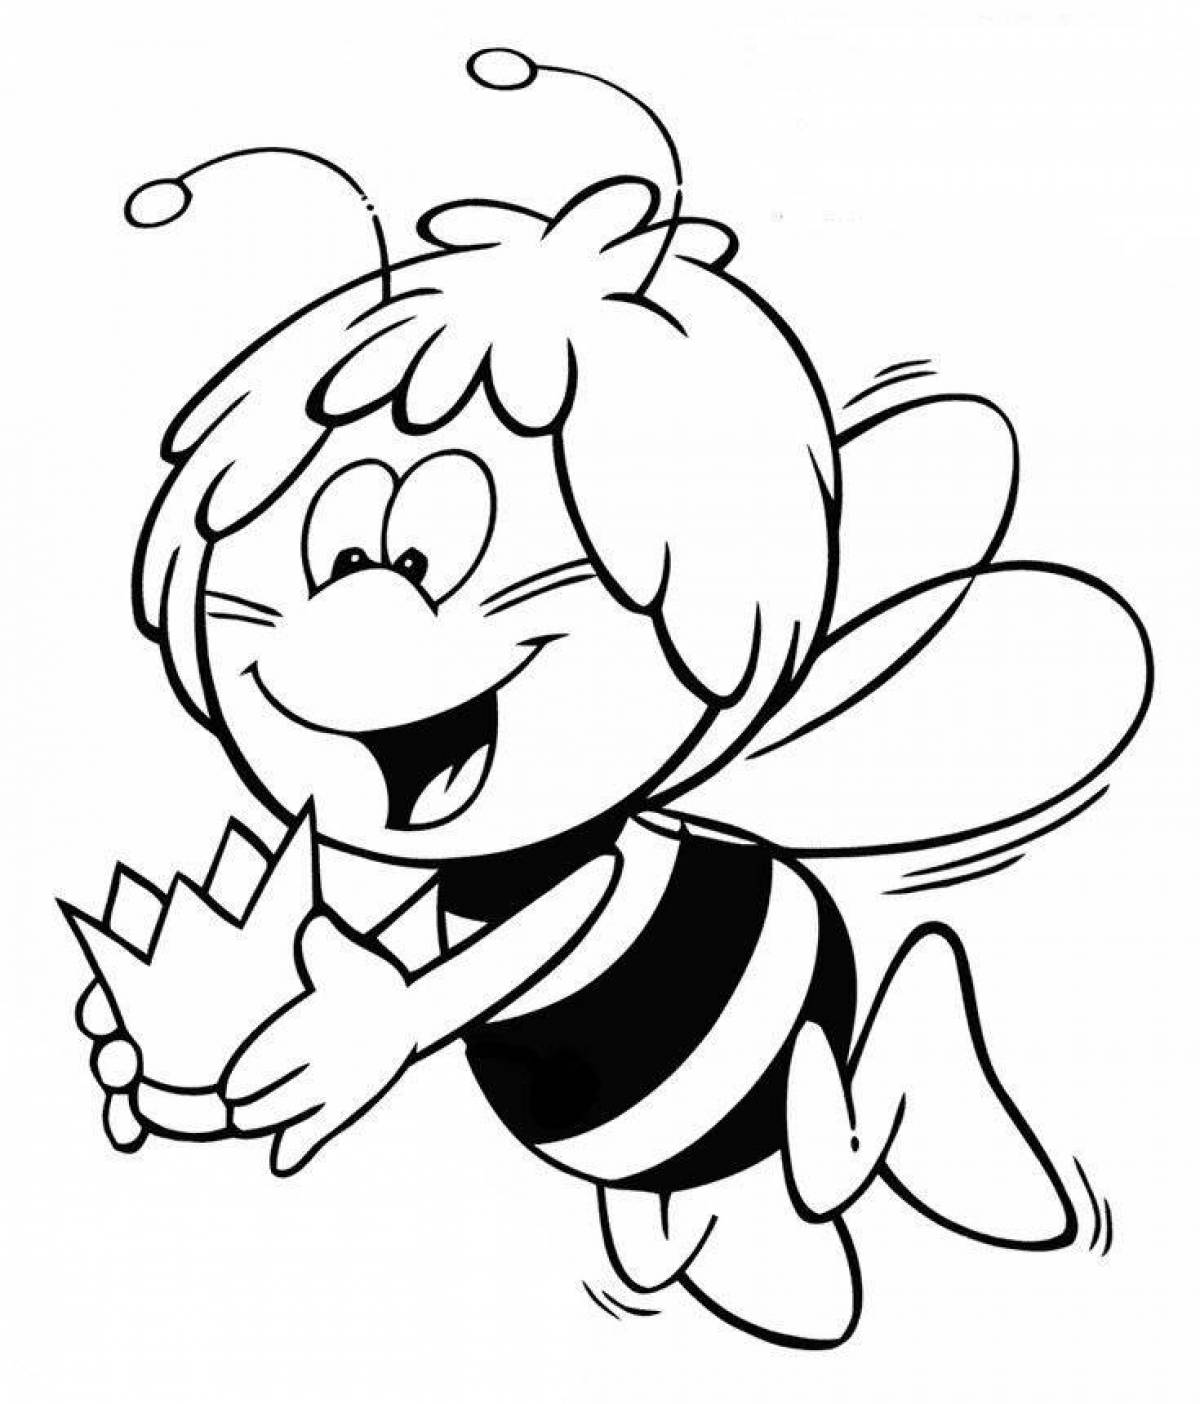 Colorful bee coloring page